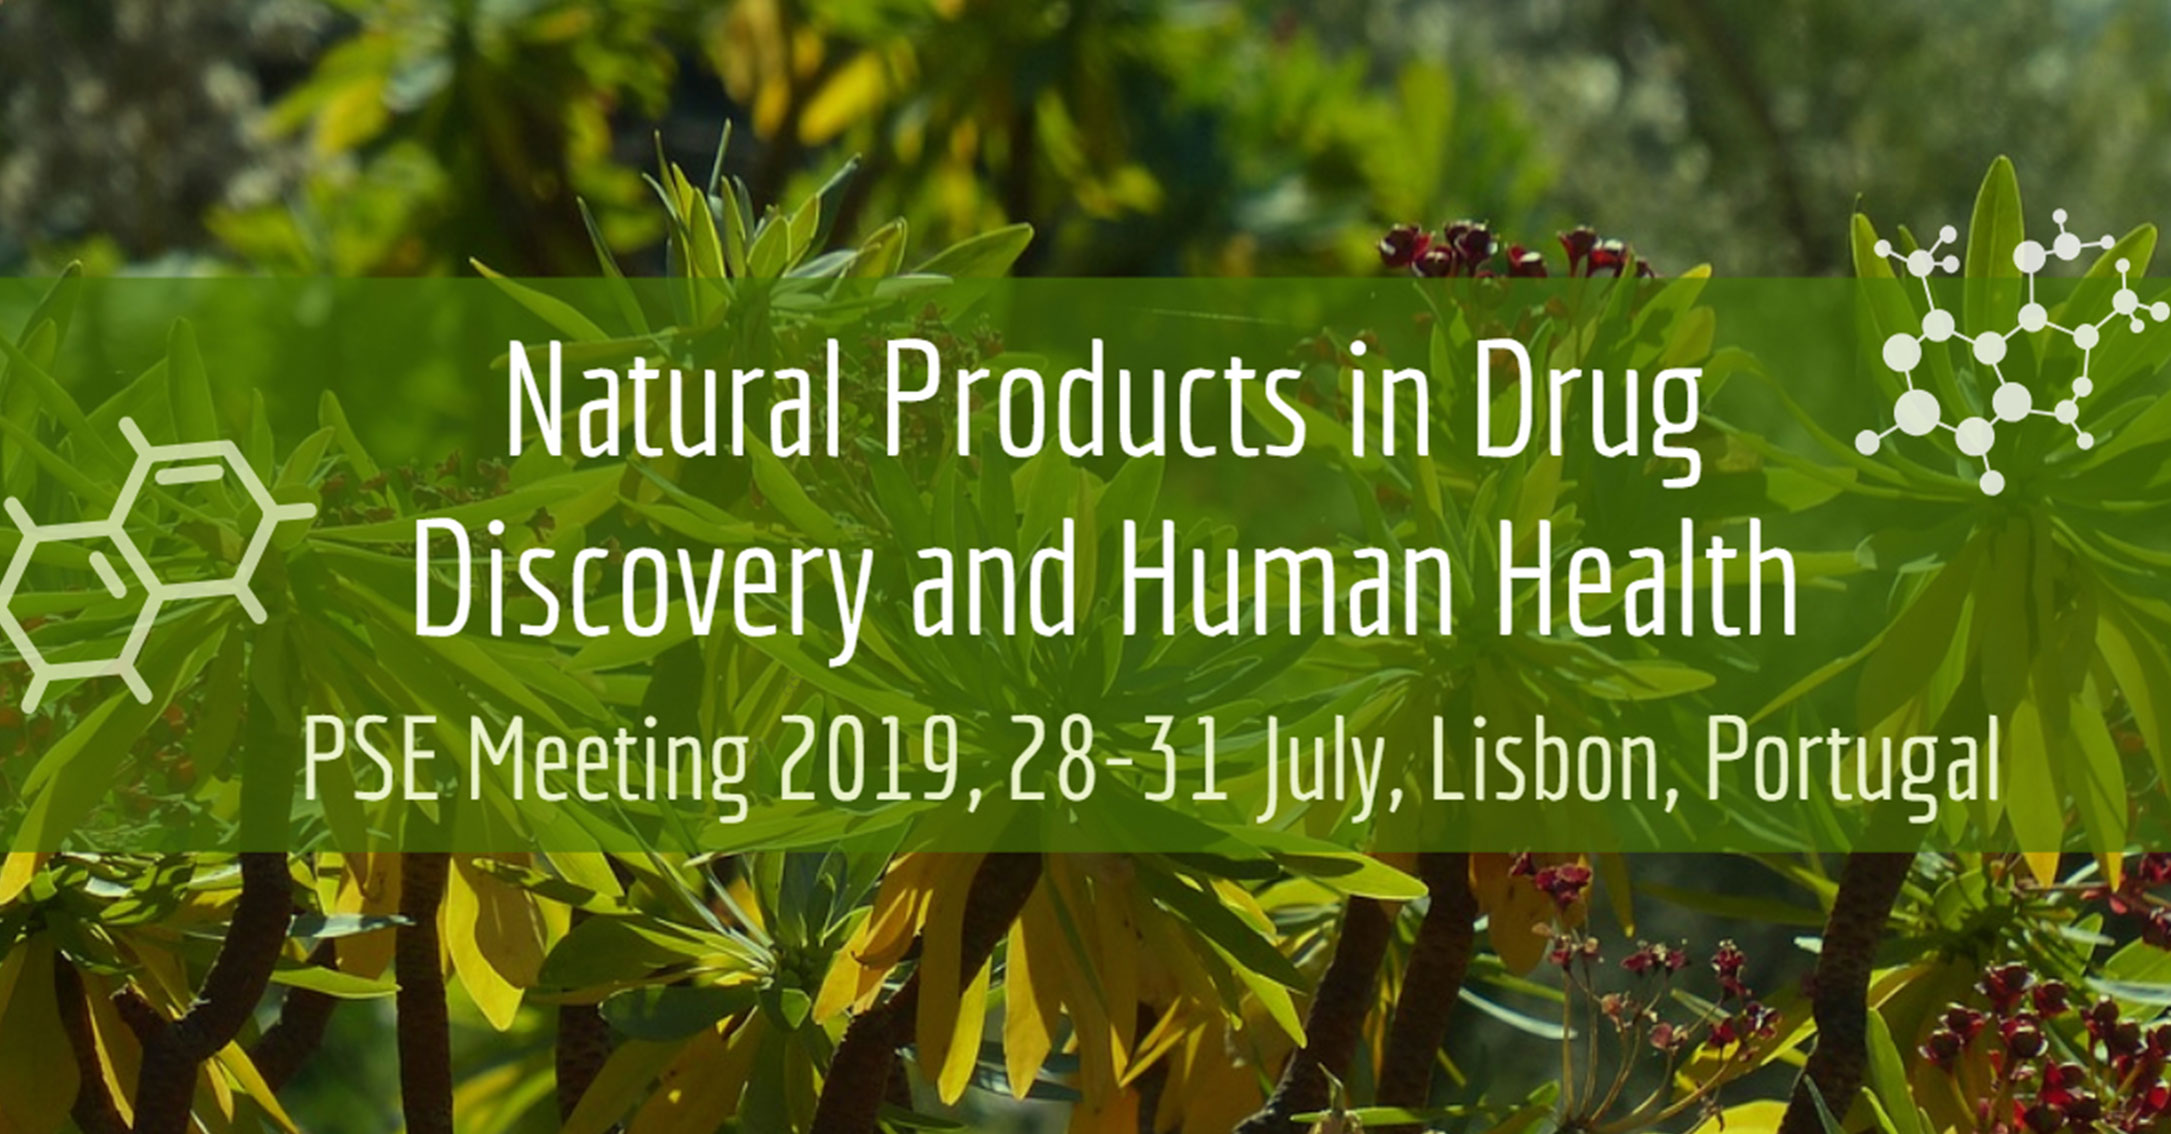 Conferência “Natural Products in Drug Discovery and Human Health (NatProdDDH)”